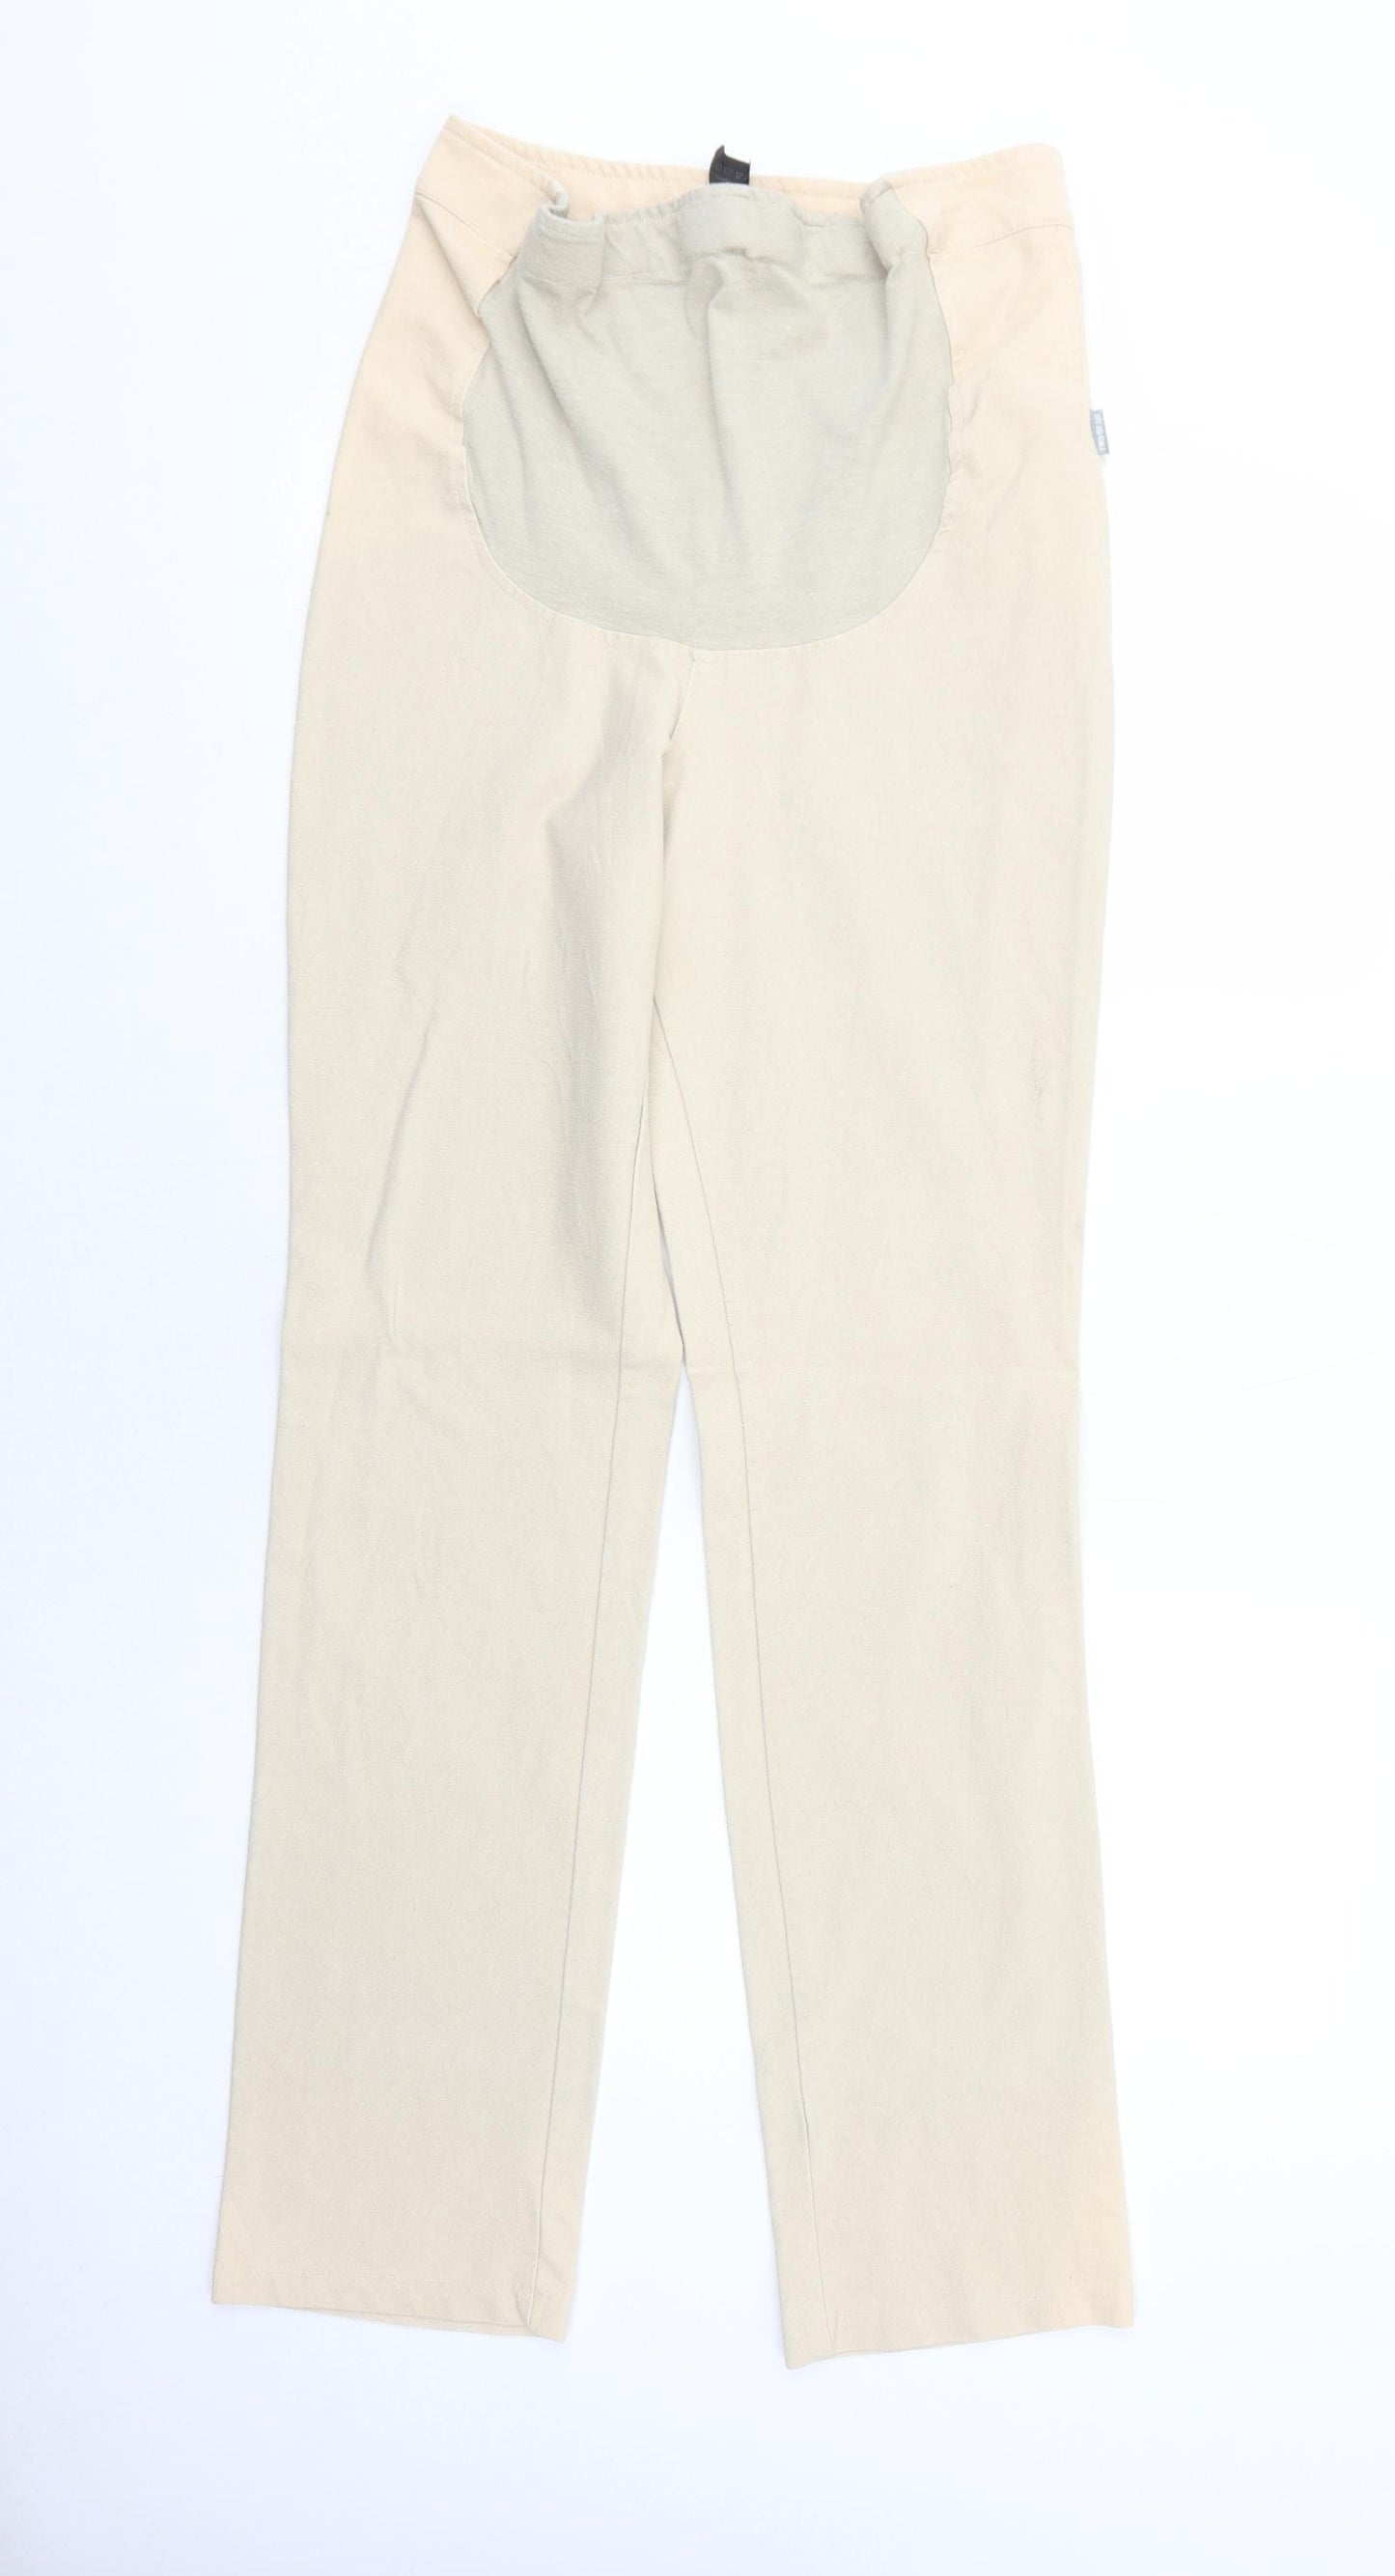 Two of Us Womens Beige Cotton Trousers Size M Regular